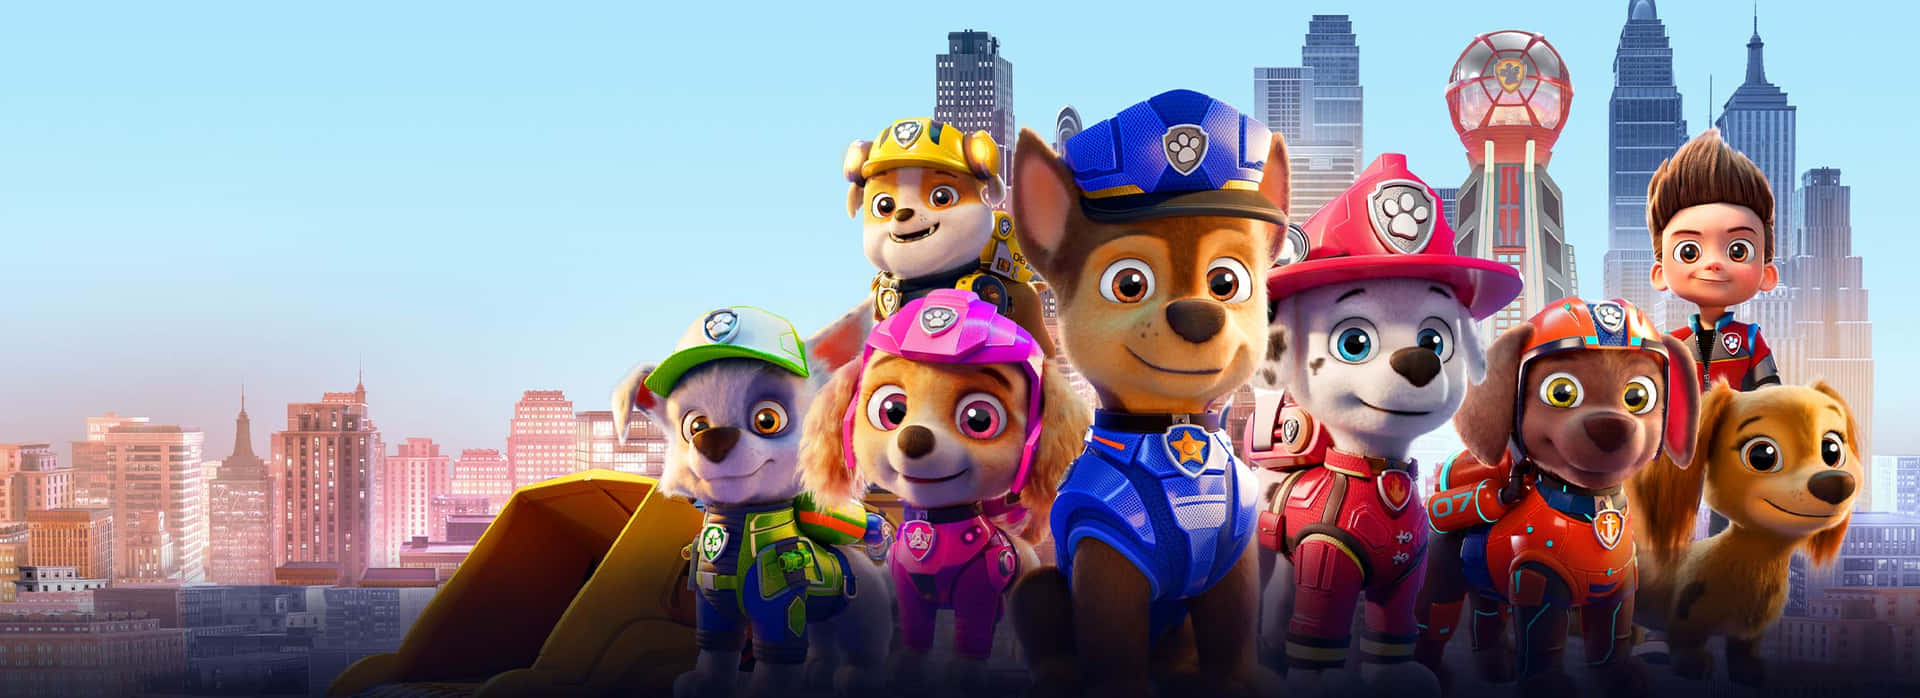 Paw Patrol The Movie And City Wallpaper